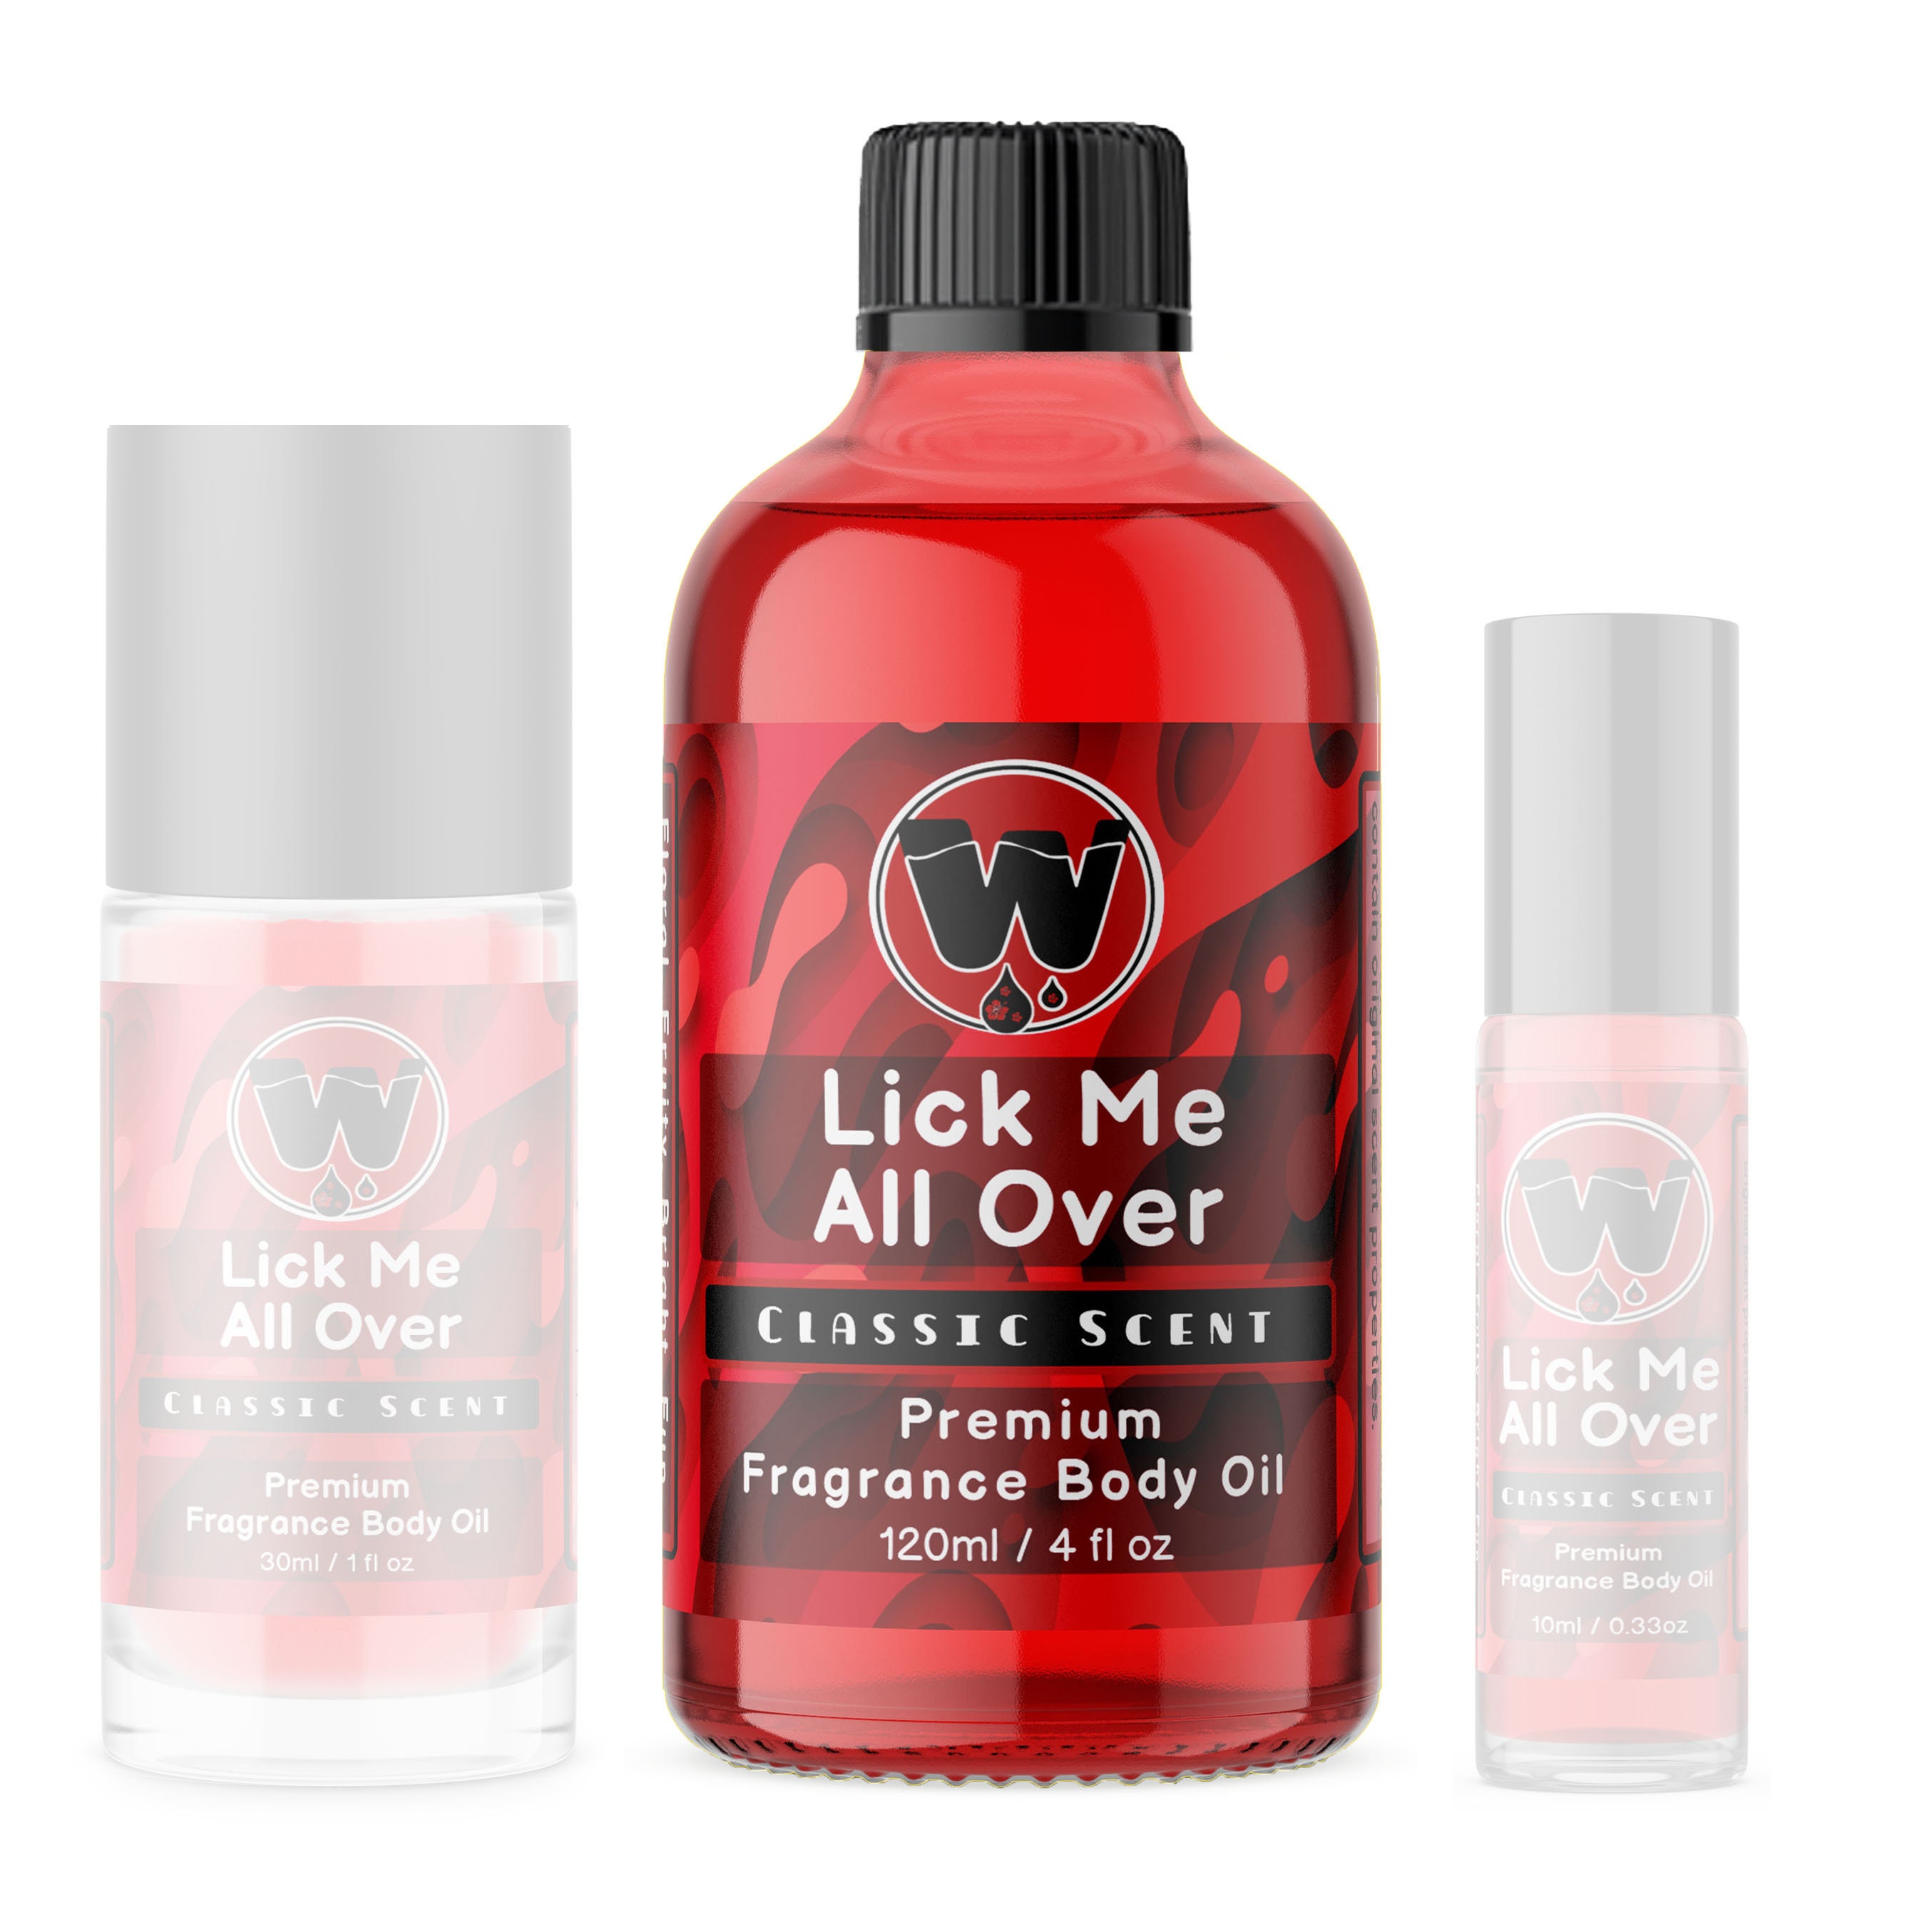 Lick Me All Over - Perfume Oil